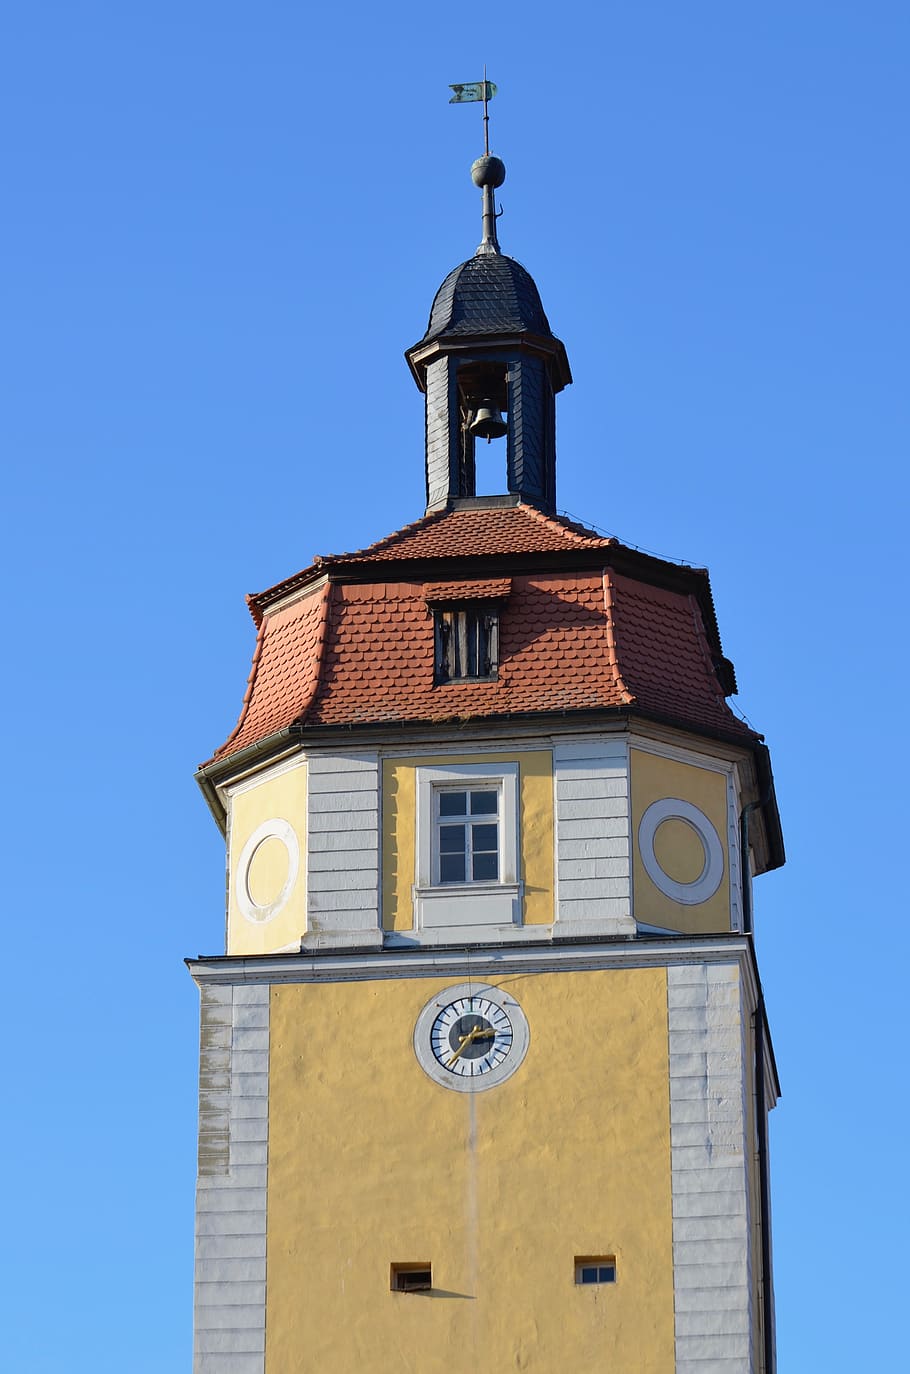 gate tower, clock tower, bell tower, architecture, historic center, history, historically, bavaria, swiss francs, lower franconia